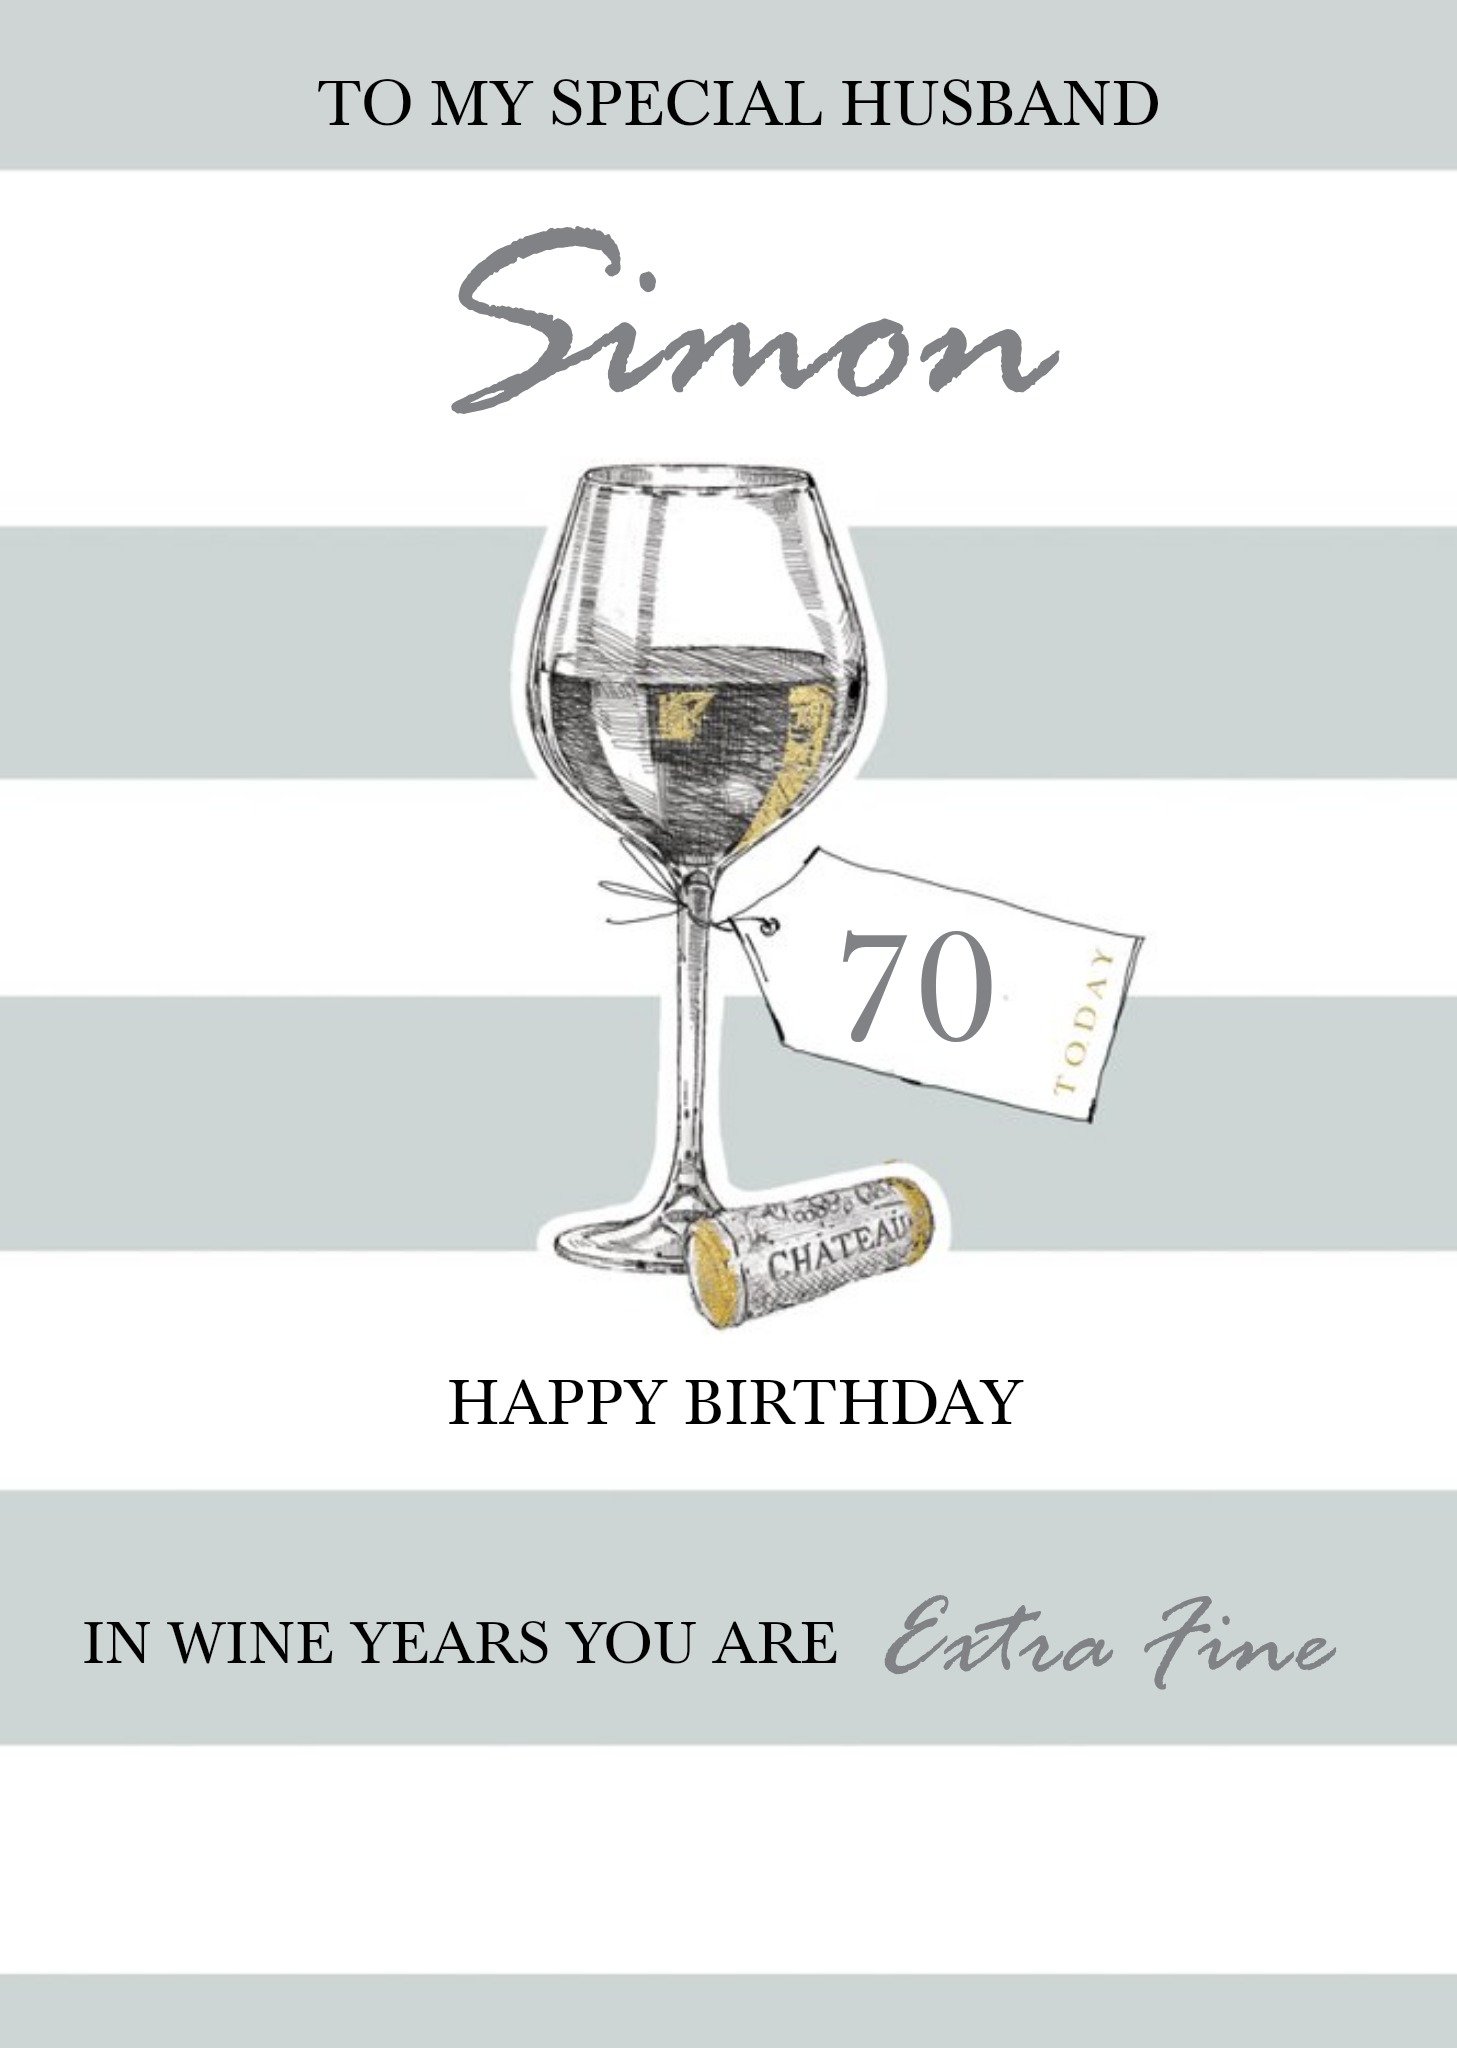 Moonpig Illustration Of A Glass Of Wine On A Striped Background Husband's Seventieth Birthday Card, 